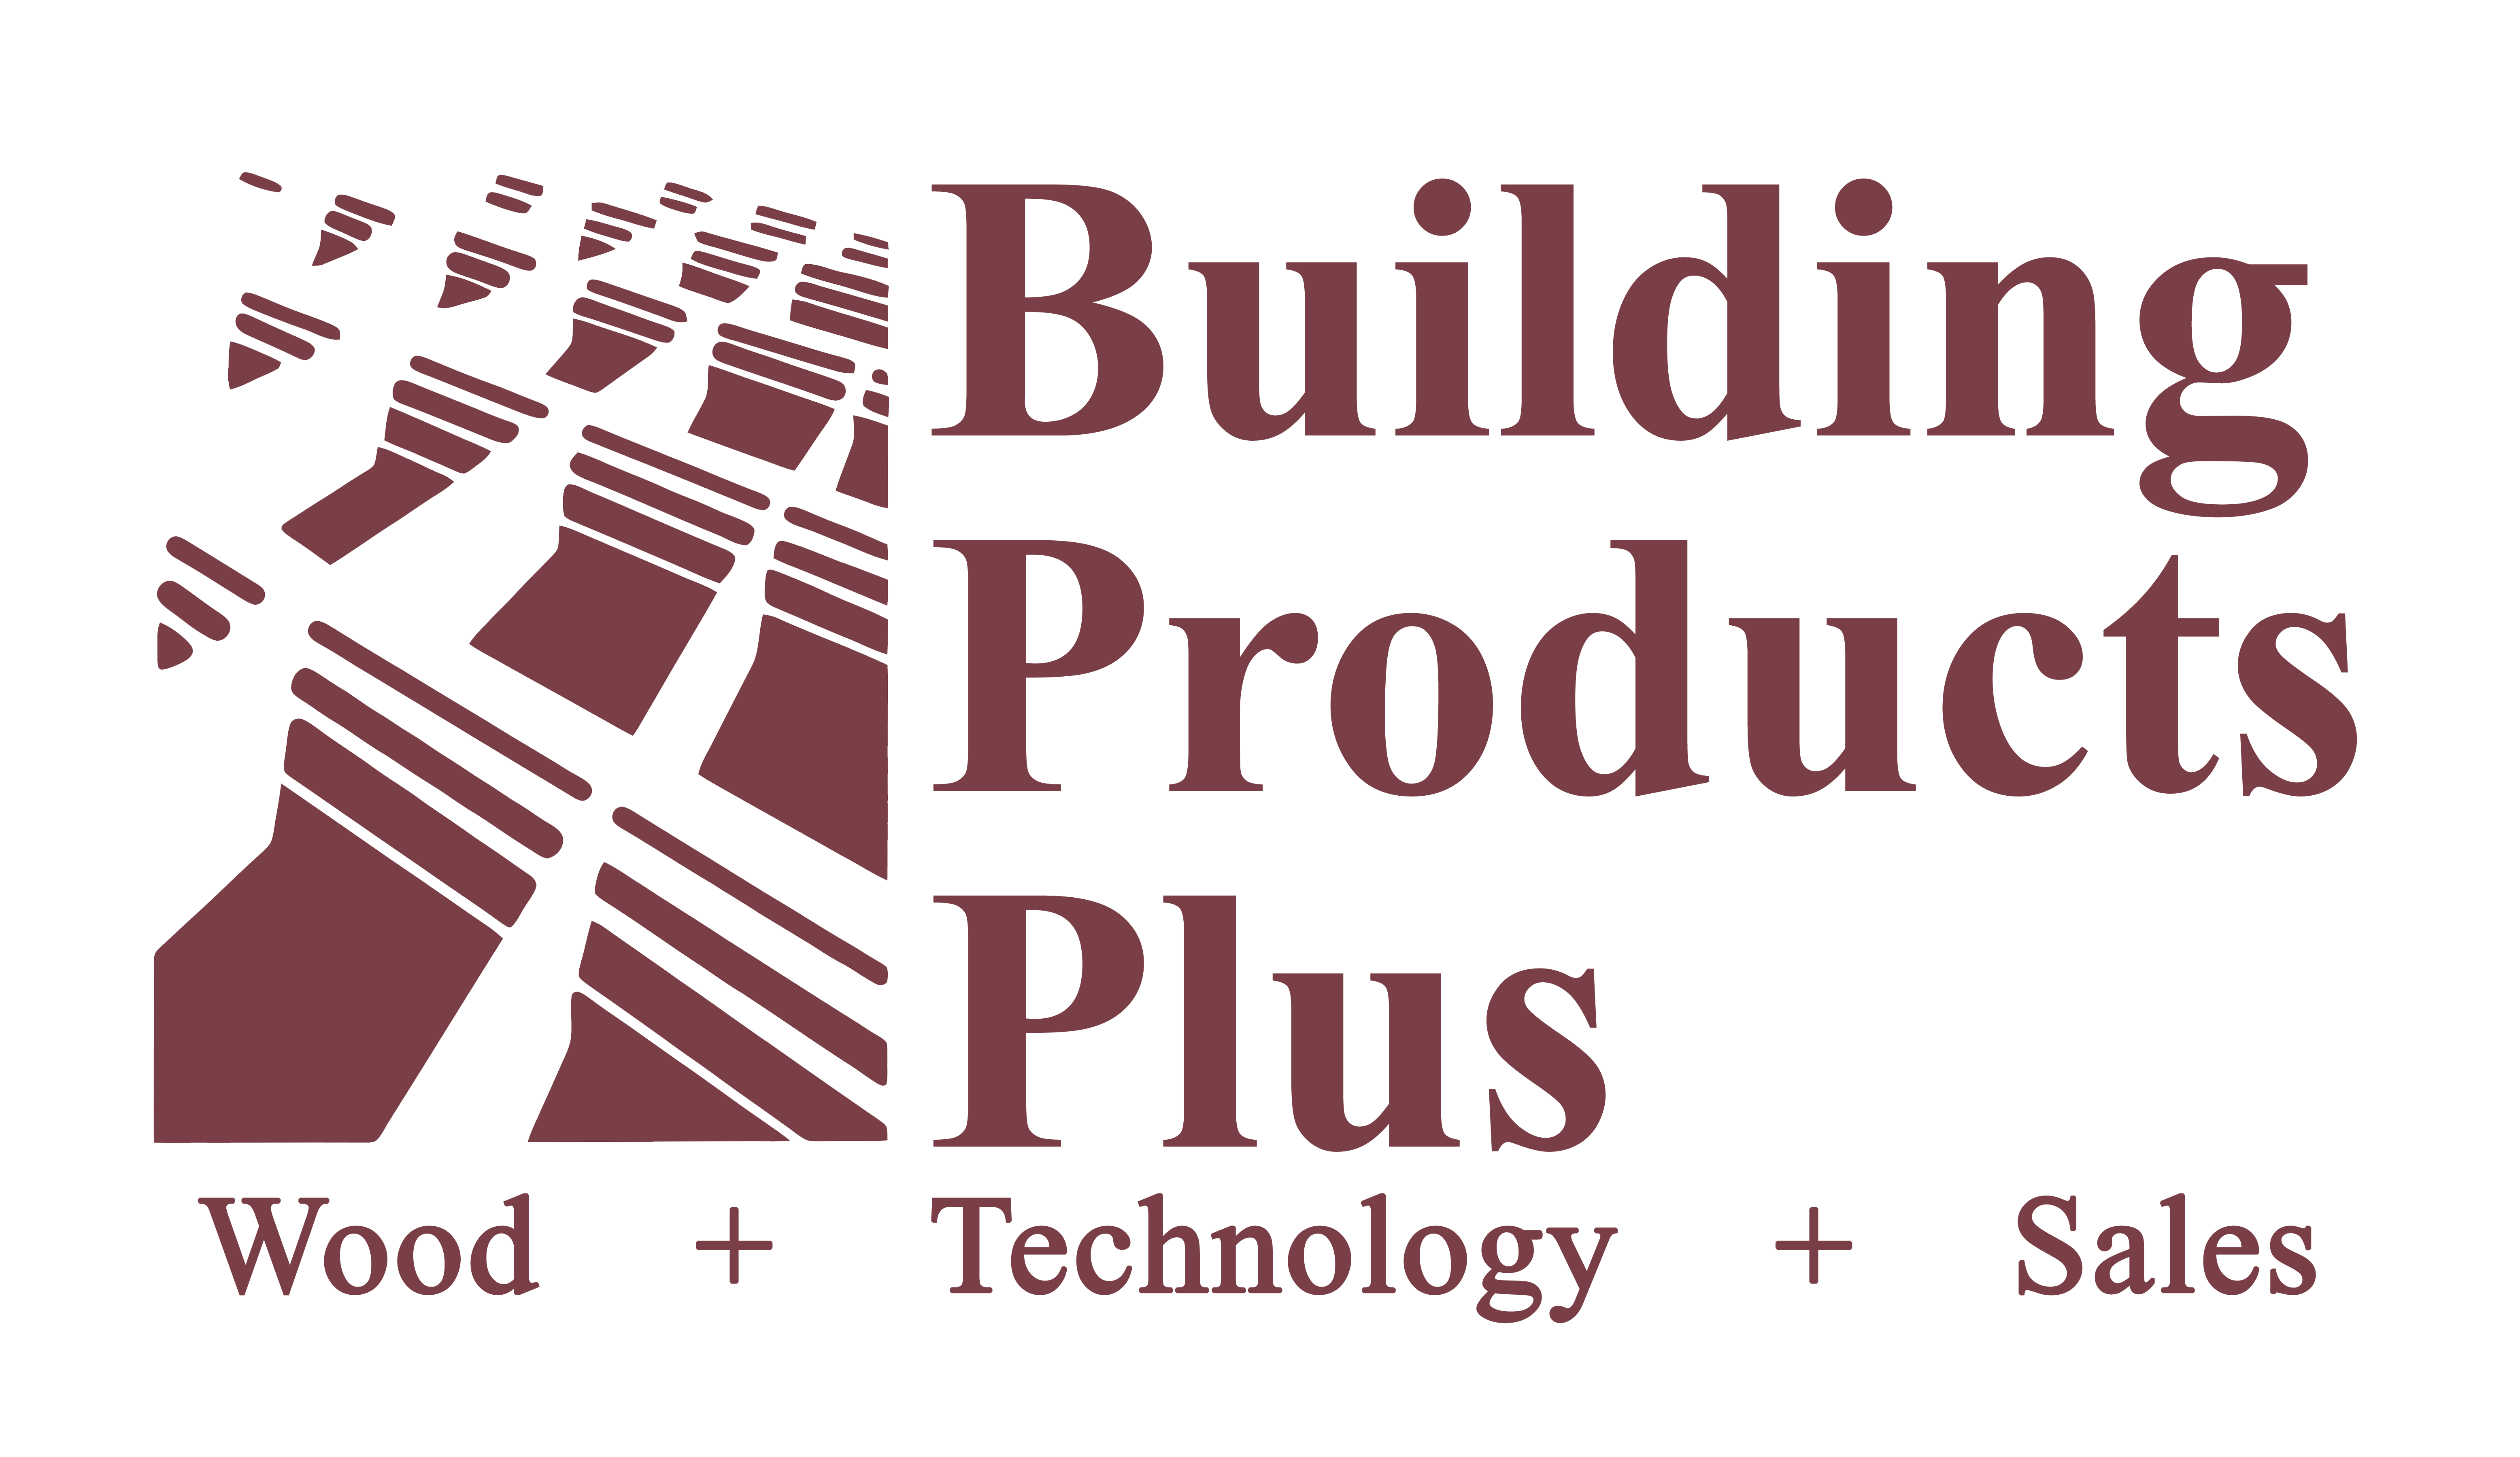 Floating Dock Kits in Texas, Louisiana, and The Caribbean from Building Products Plus